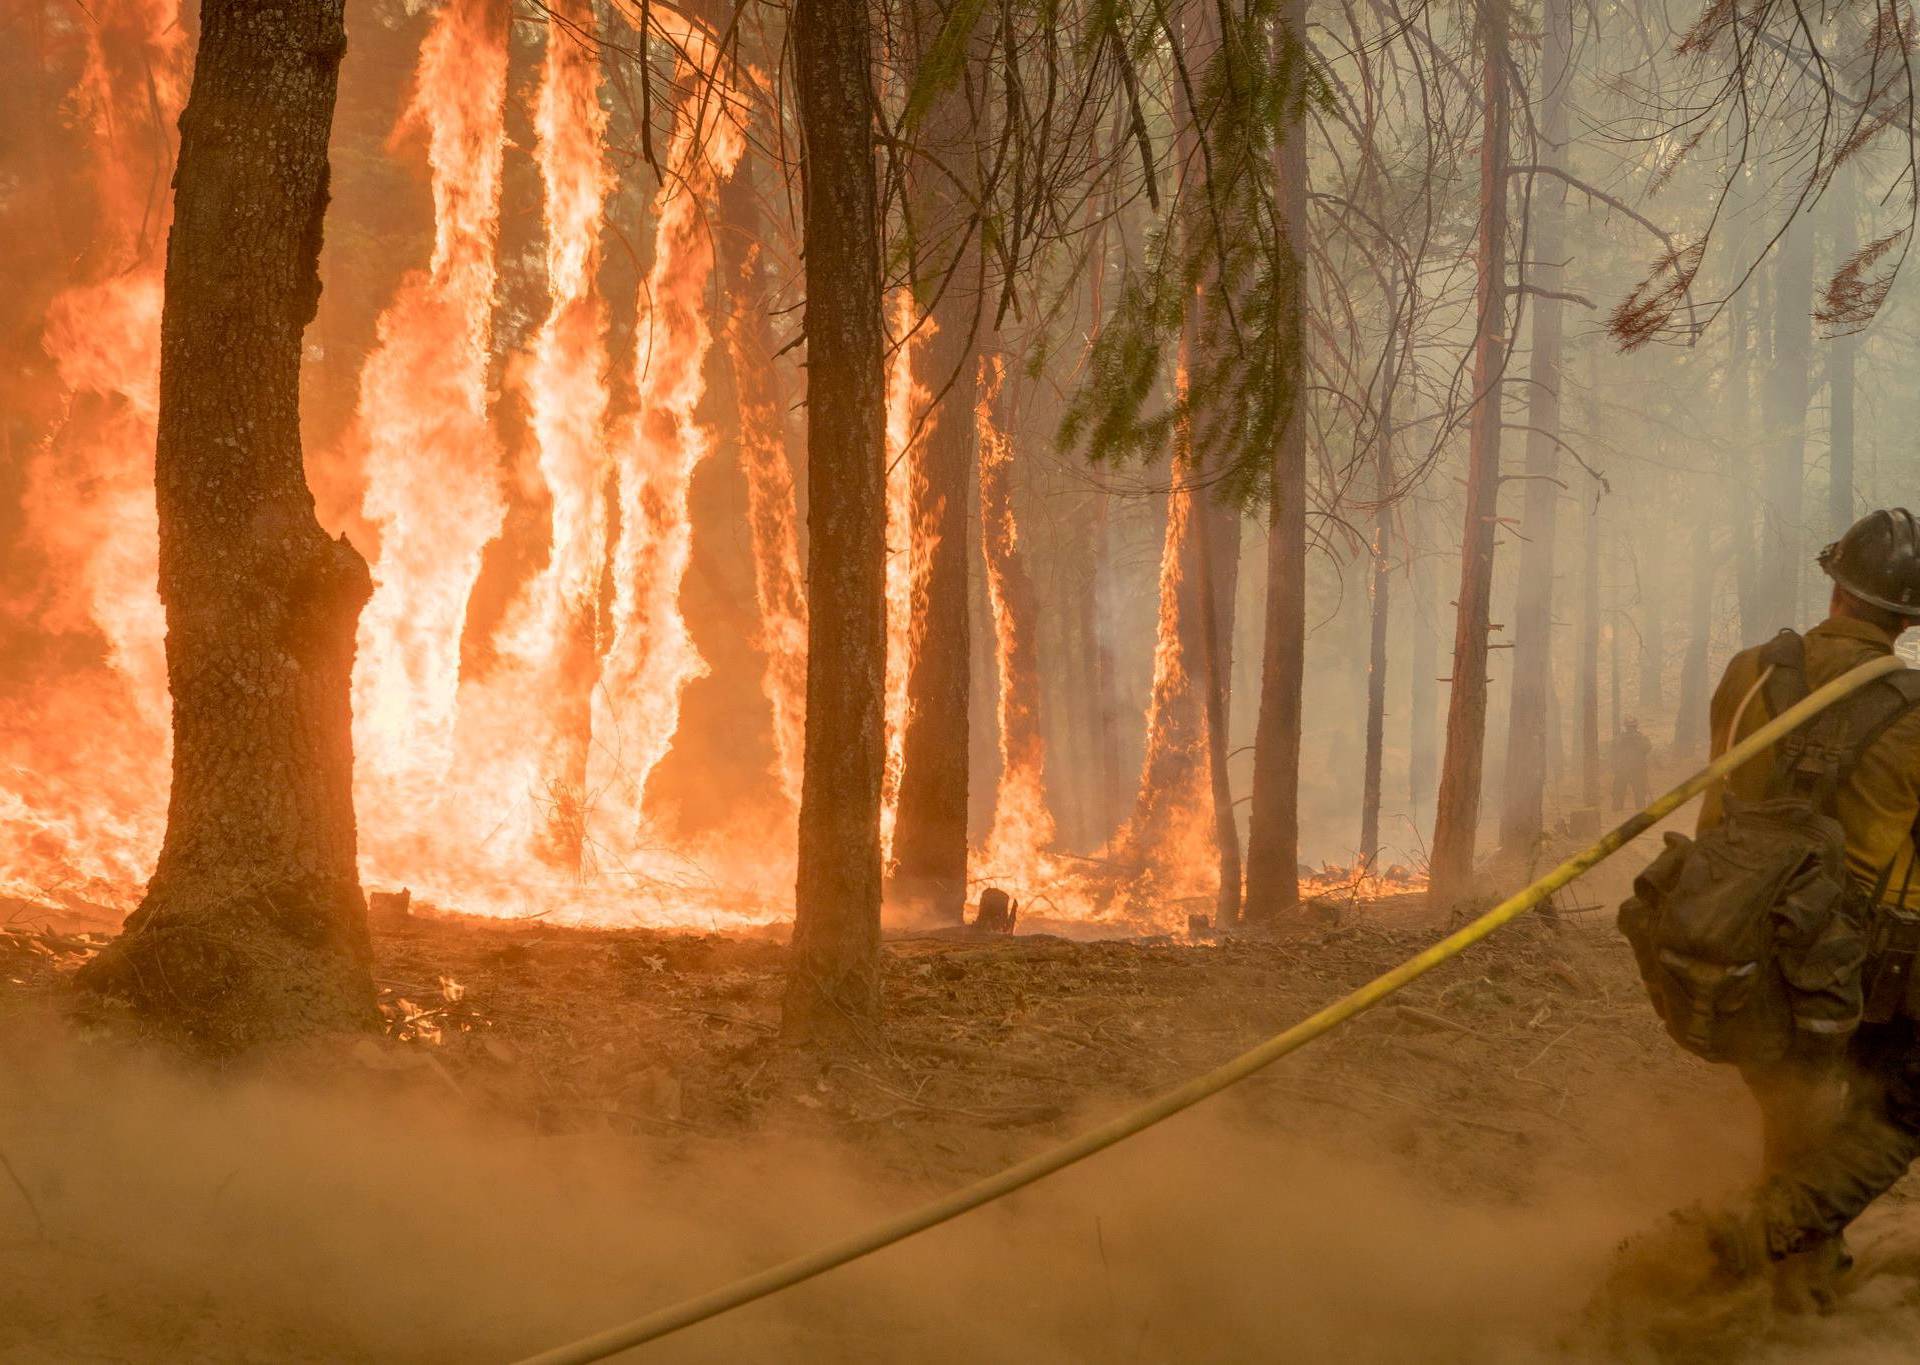 Firefighter fight fire near torching trees as wildfire burns near Yosemite National Park